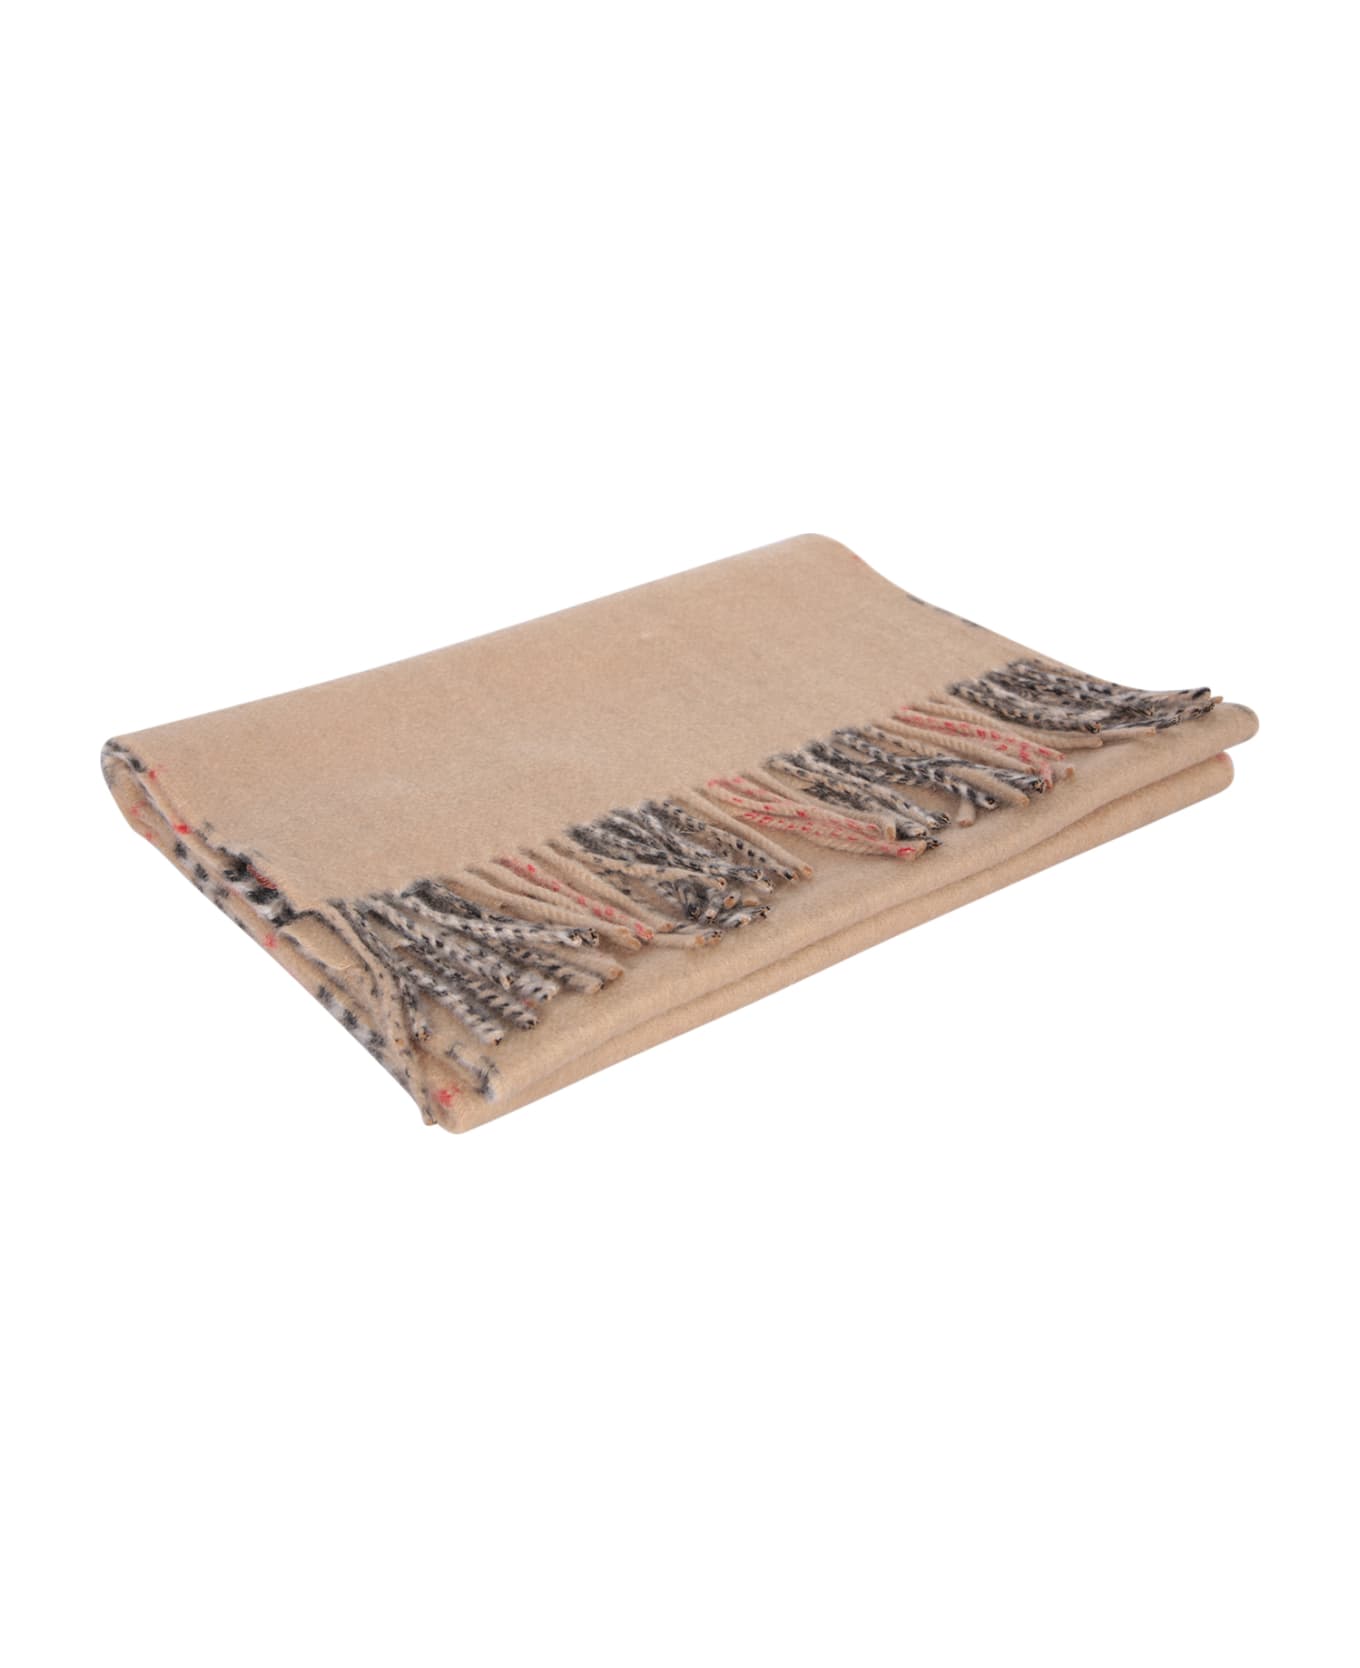 Burberry Reversible Cashmere Check Scarf - Beige